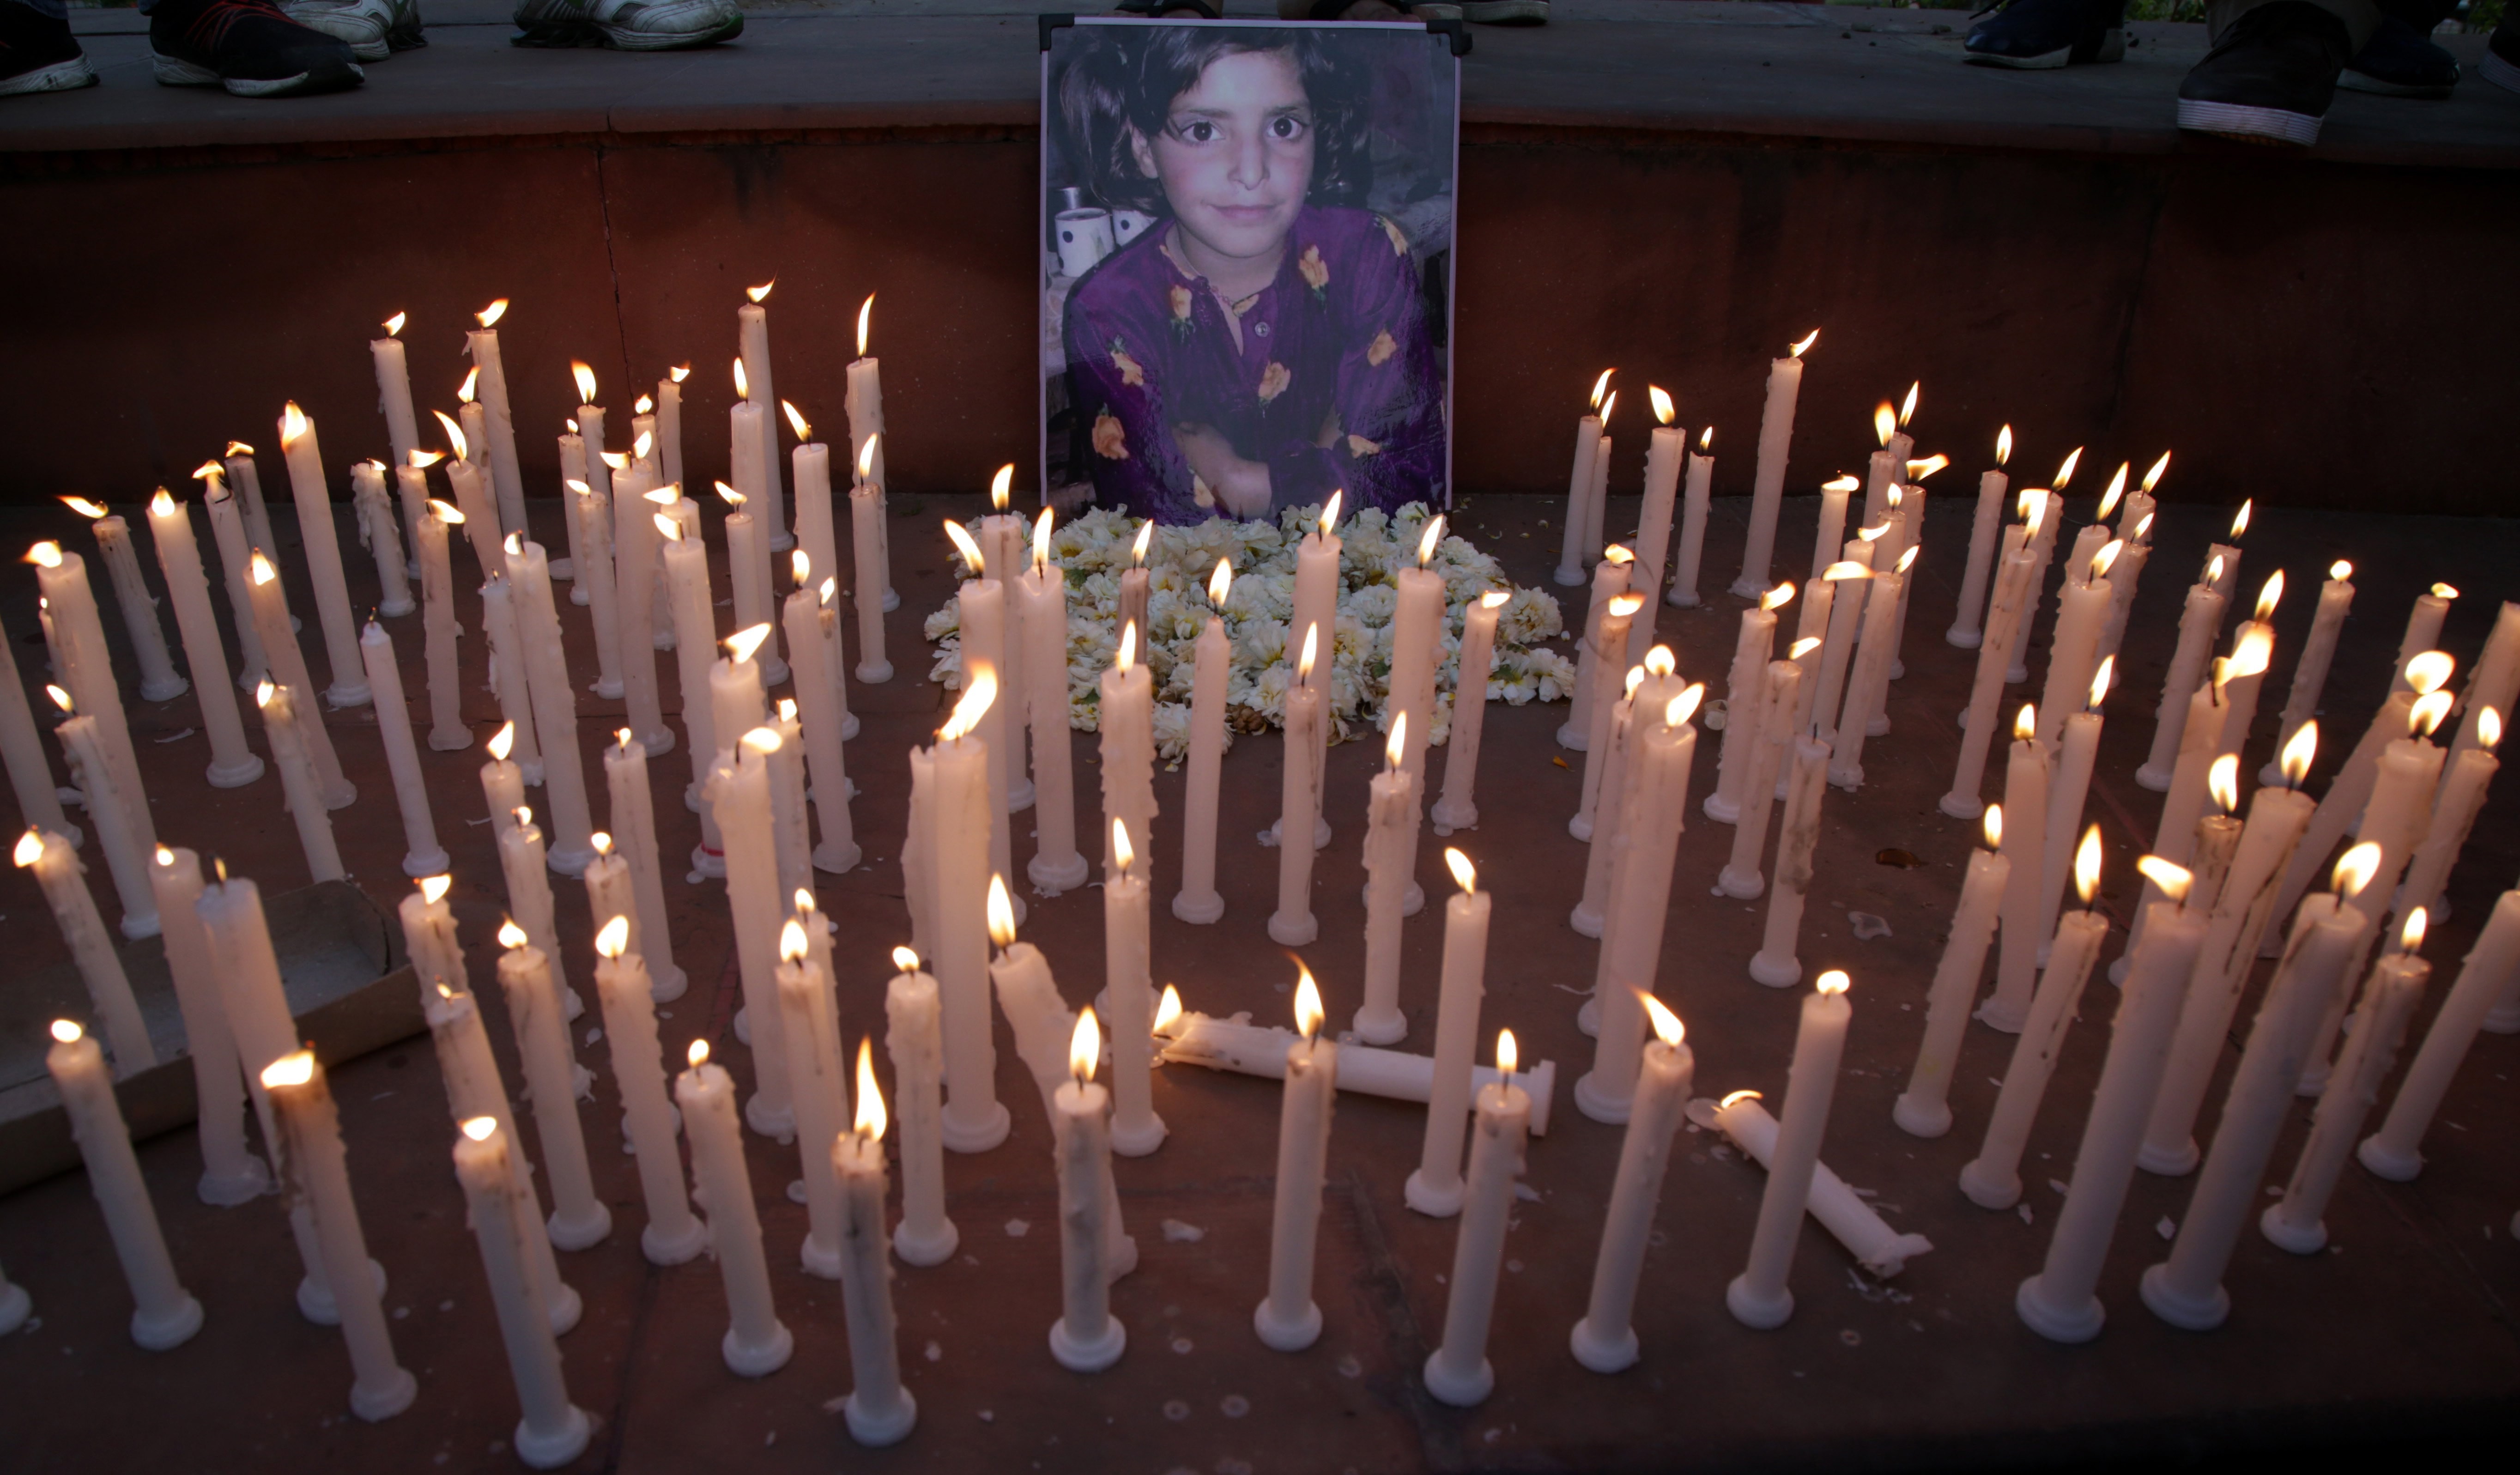 Eight-year-old Asifa’s rape and murder was not an opportunist crime, but a result of the politics of hatred by Hindu supremacists that dehumanises Muslims